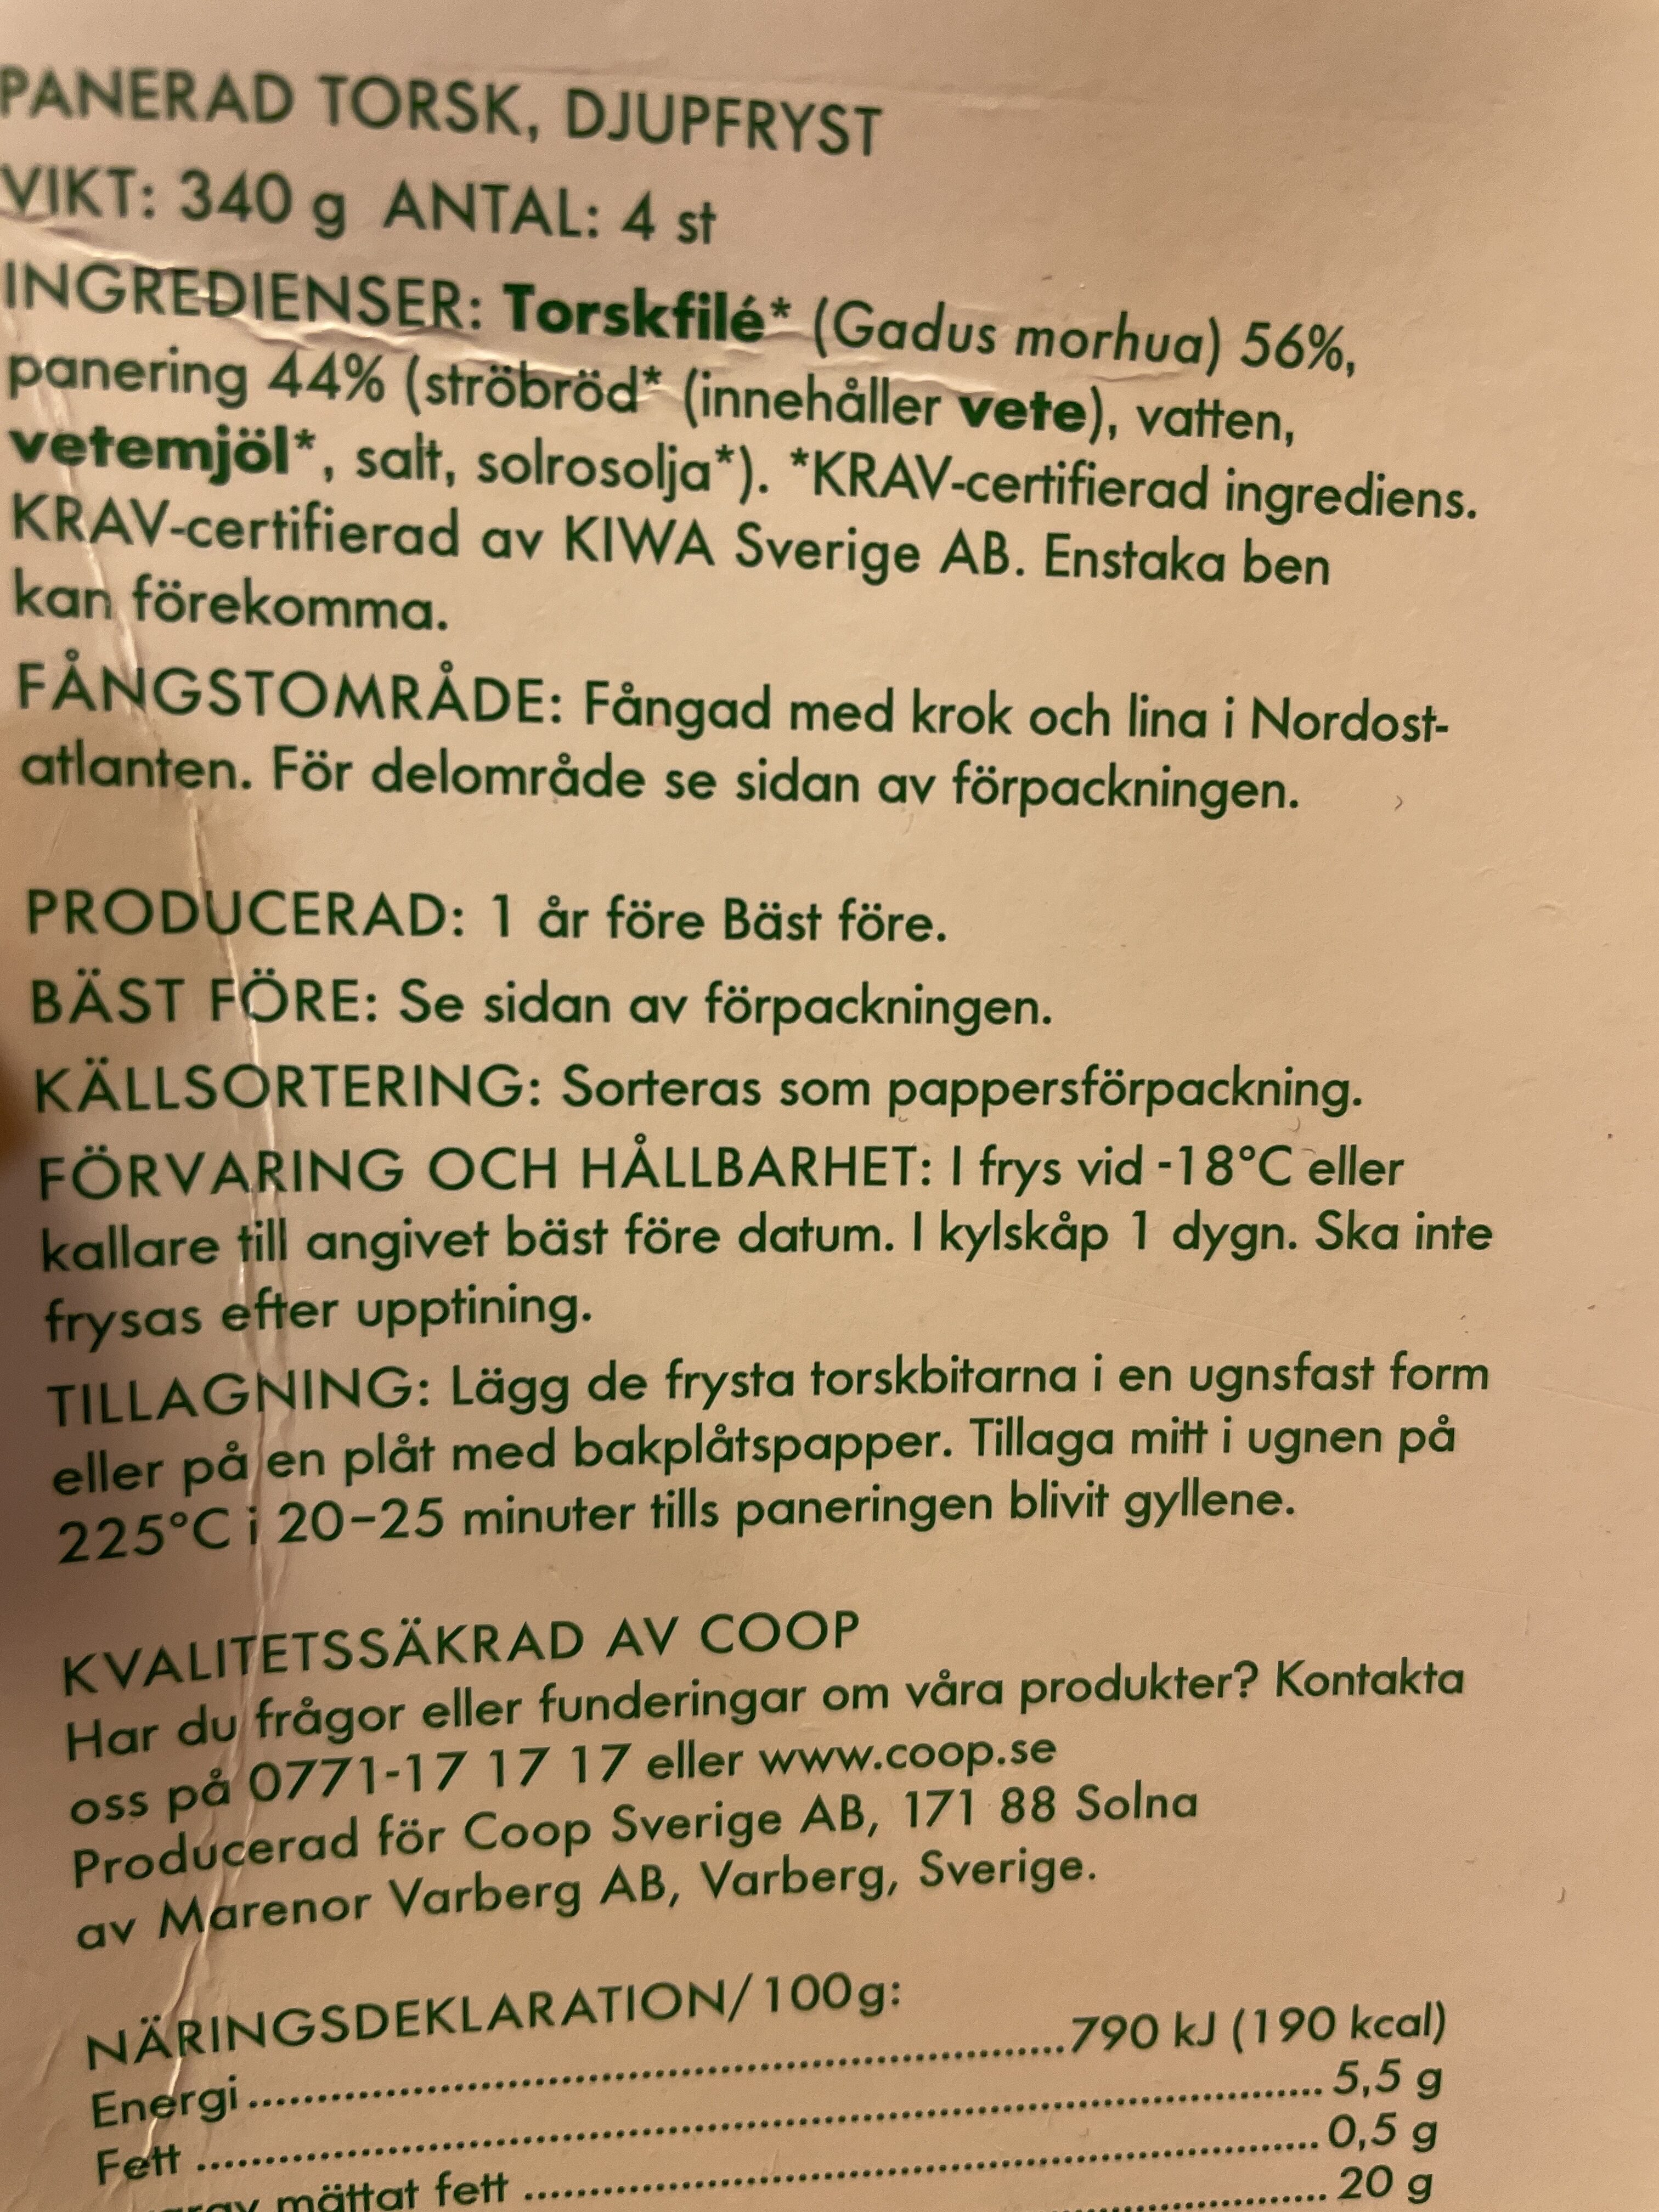 Coop Änglamark Panerad torsk - Recycling instructions and/or packaging information